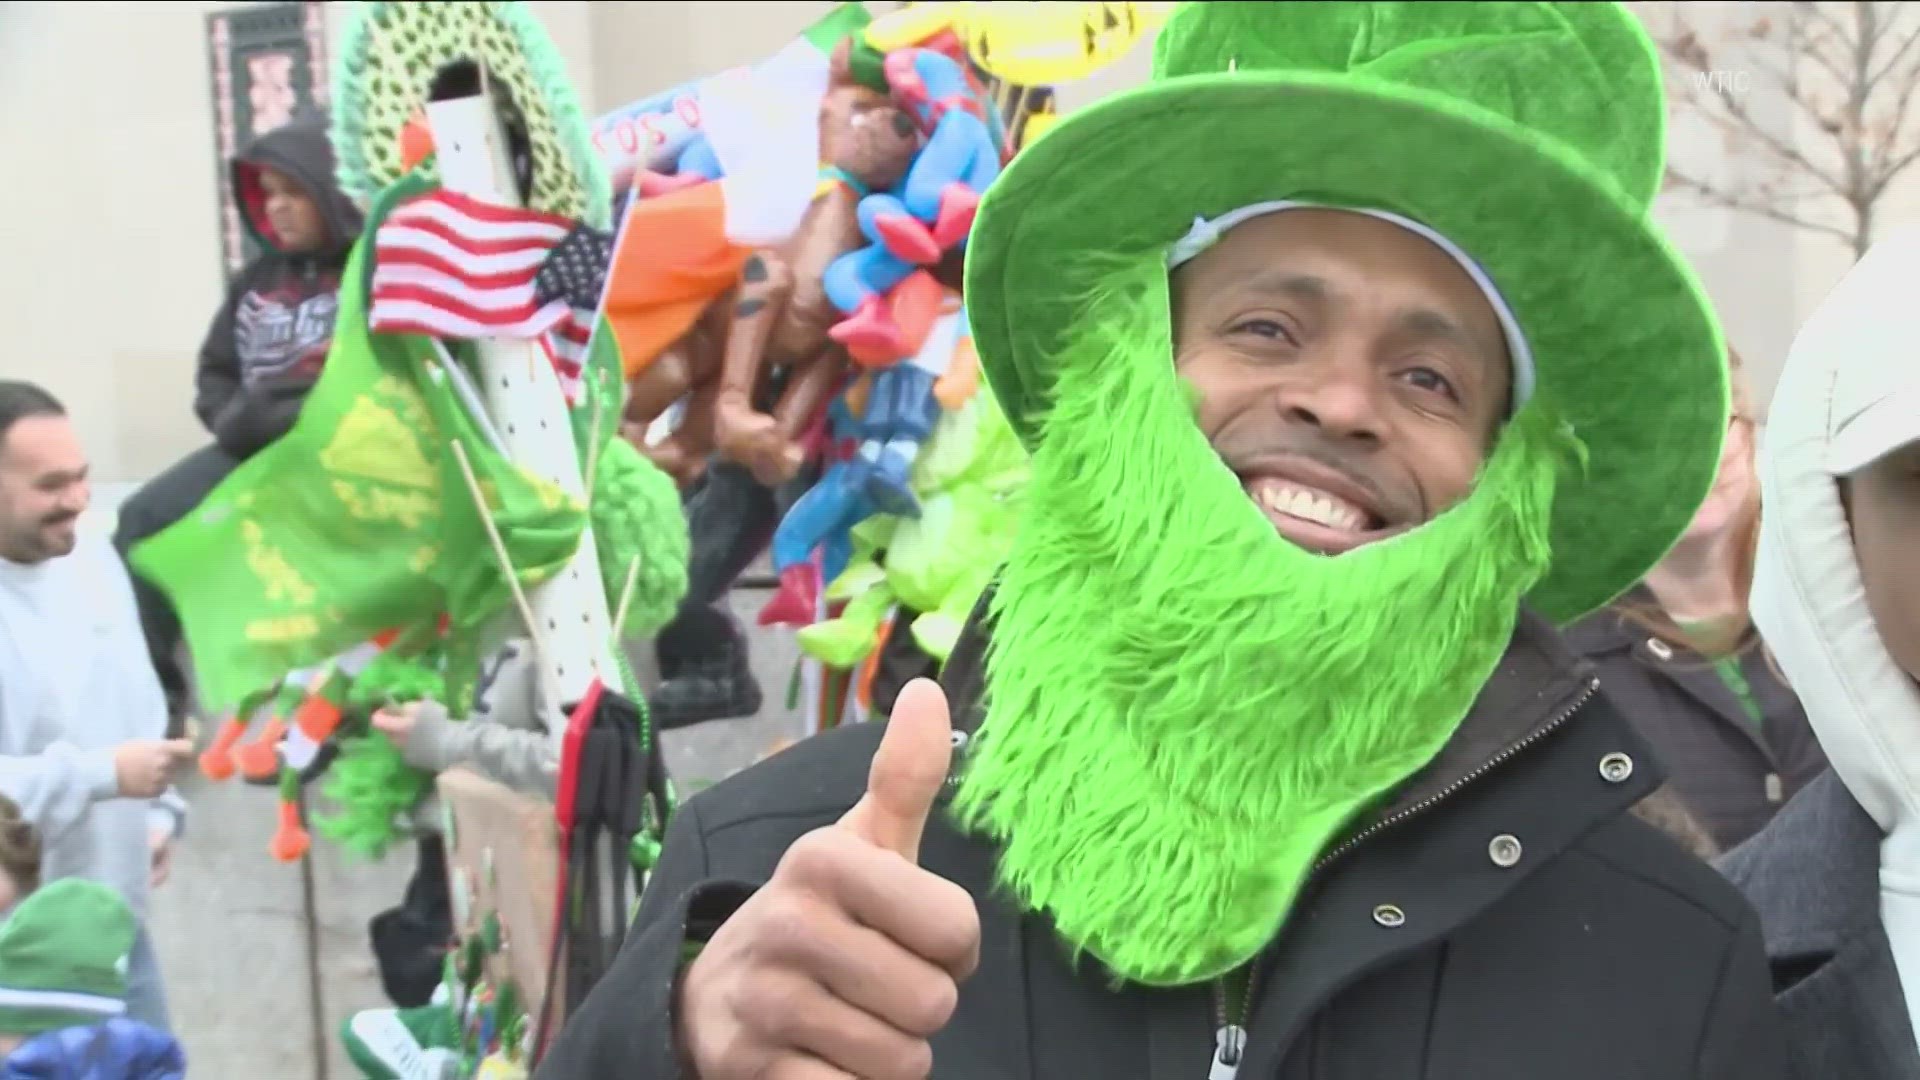 VERIFY takes a look at the origins and history behind St. Patrick's Day.